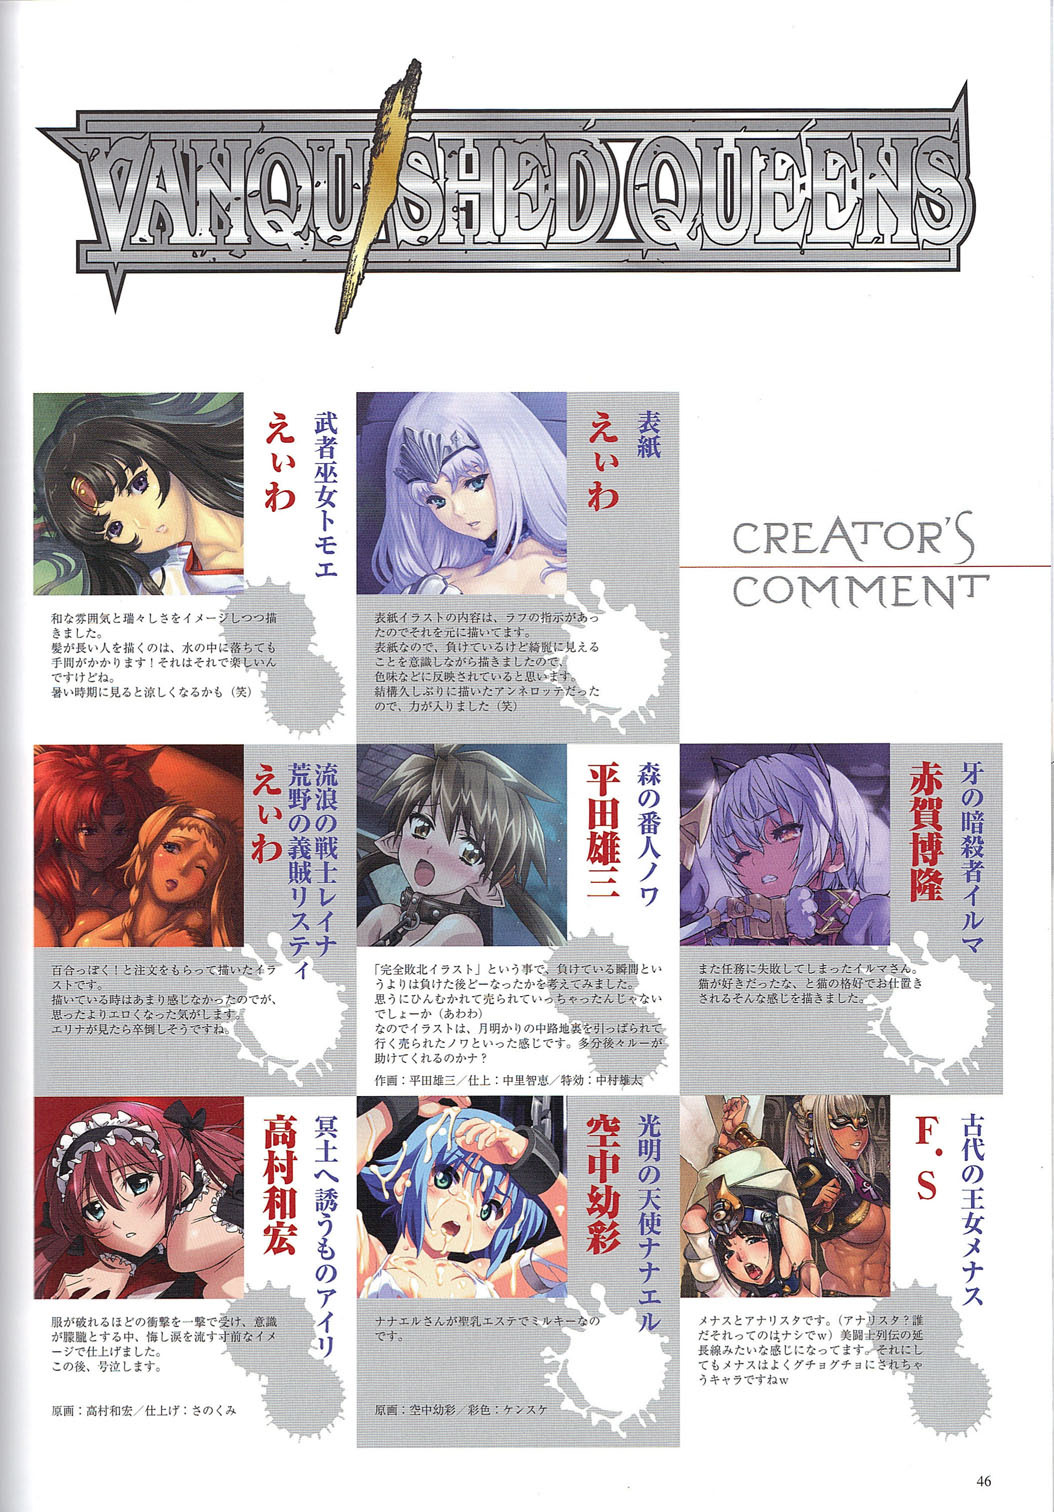 [Various] Vanquished Queens Visual Book (Queen's Blade) [English] [leecherboy] page 25 full